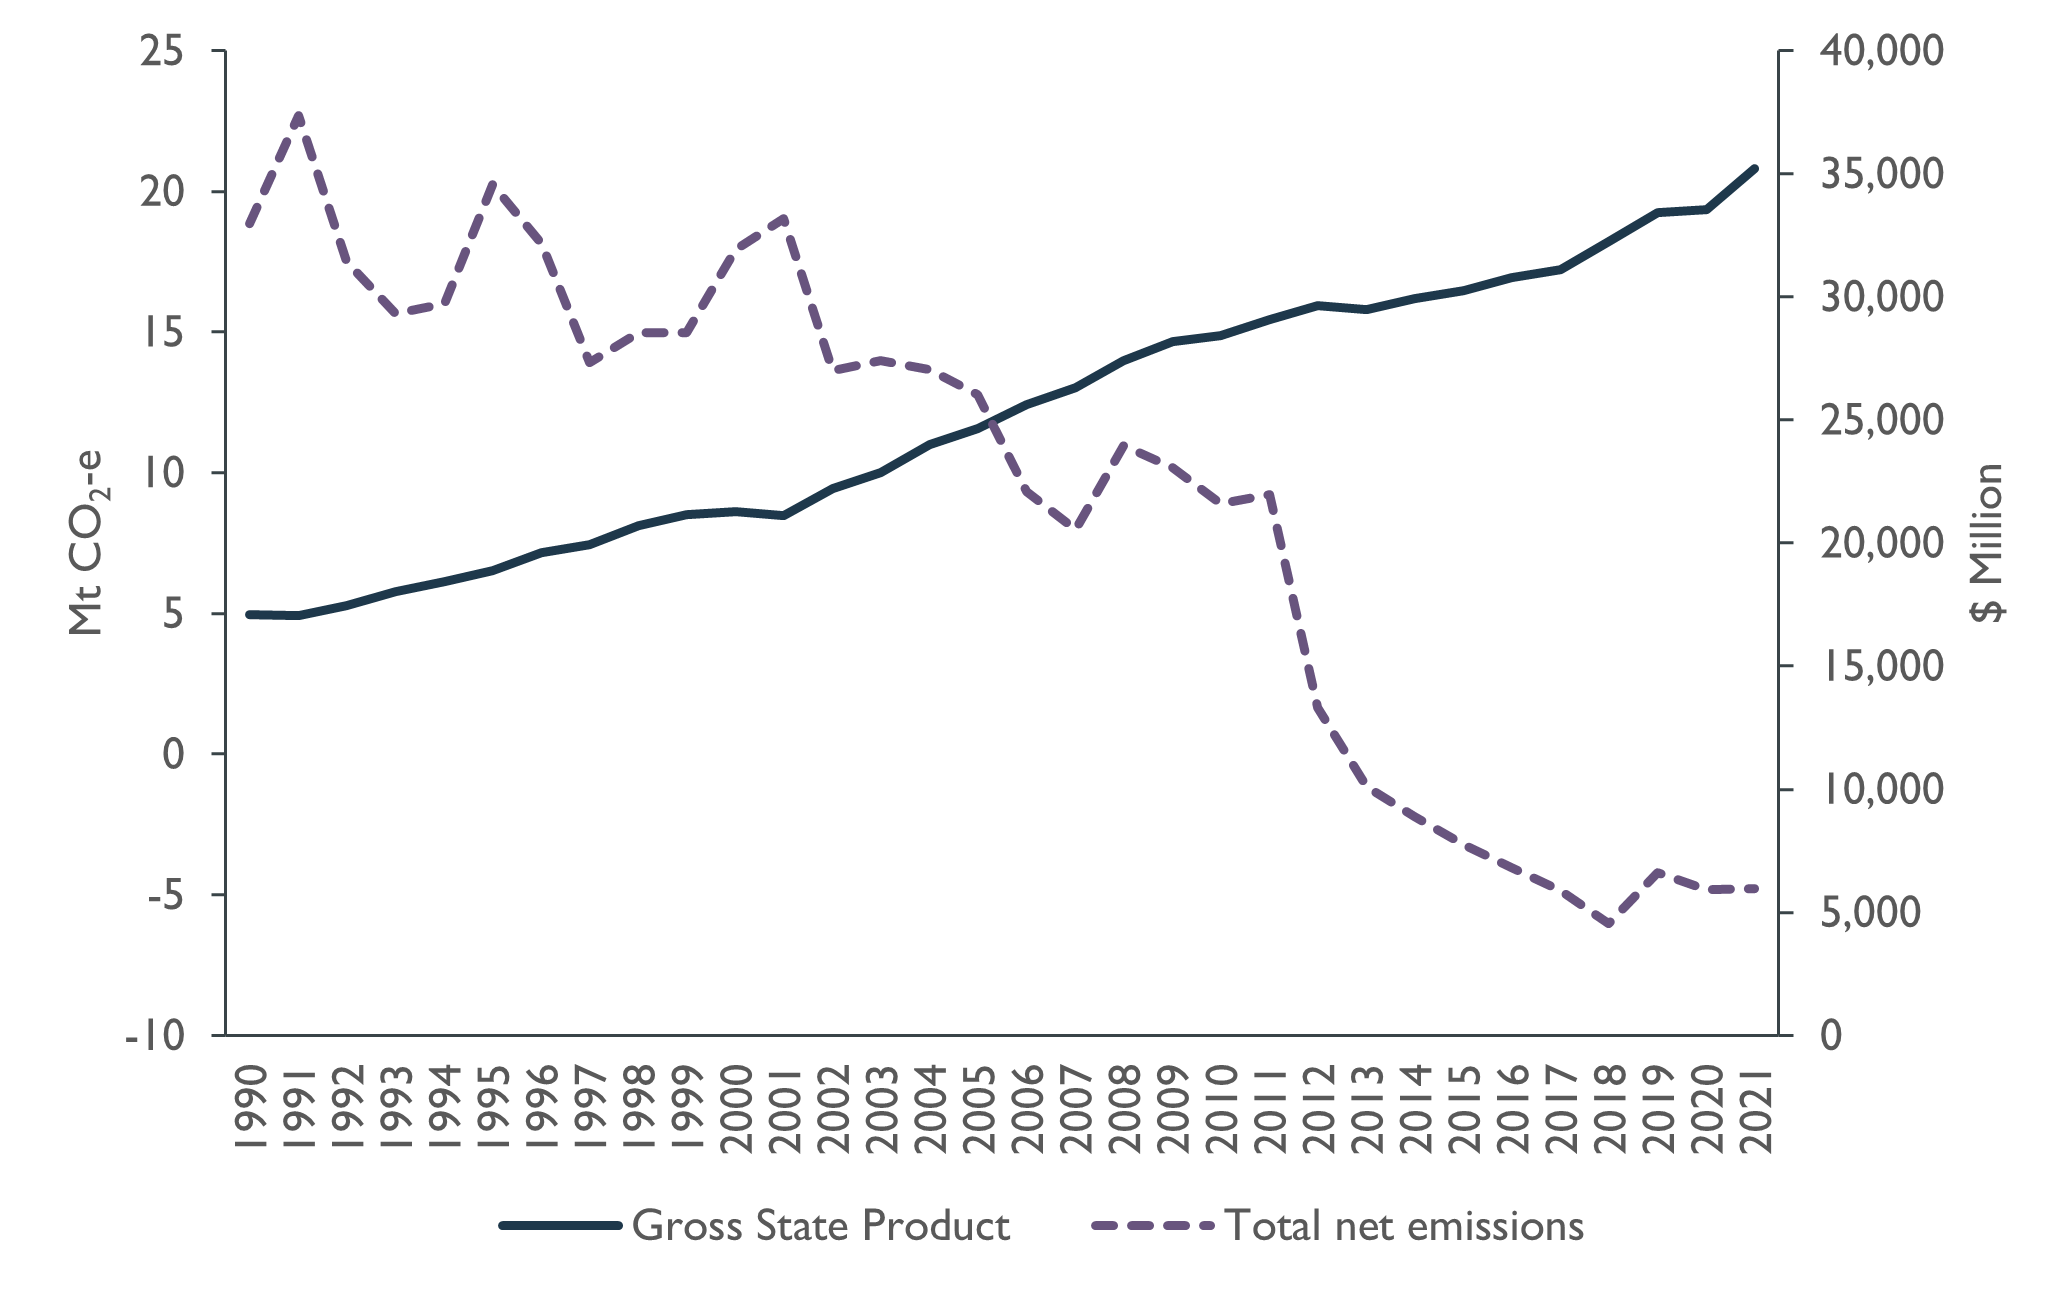 This figure combines two line charts representing Tasmania's real Gross State Product (GSP), and Tasmania's total emissions, to show the change in Tasmania's emissions and GSP from 1990 to 2021. It shows Tasmania's real GSP steadily increasing by a total of 106.2 per cent over this period (from $17,069,000,000 to $35,195,000,000). The dashed line shows a decrease of 125.5 per cent in Tasmania's total net emissions over this period, with emissions reaching a peak in 1991 (22.69 megatonnes of carbon dioxide equivalent), declining to achieve negative net emissions in 2013, to minus 4.80 megatonnes of carbon dioxide equivalent in 2021.